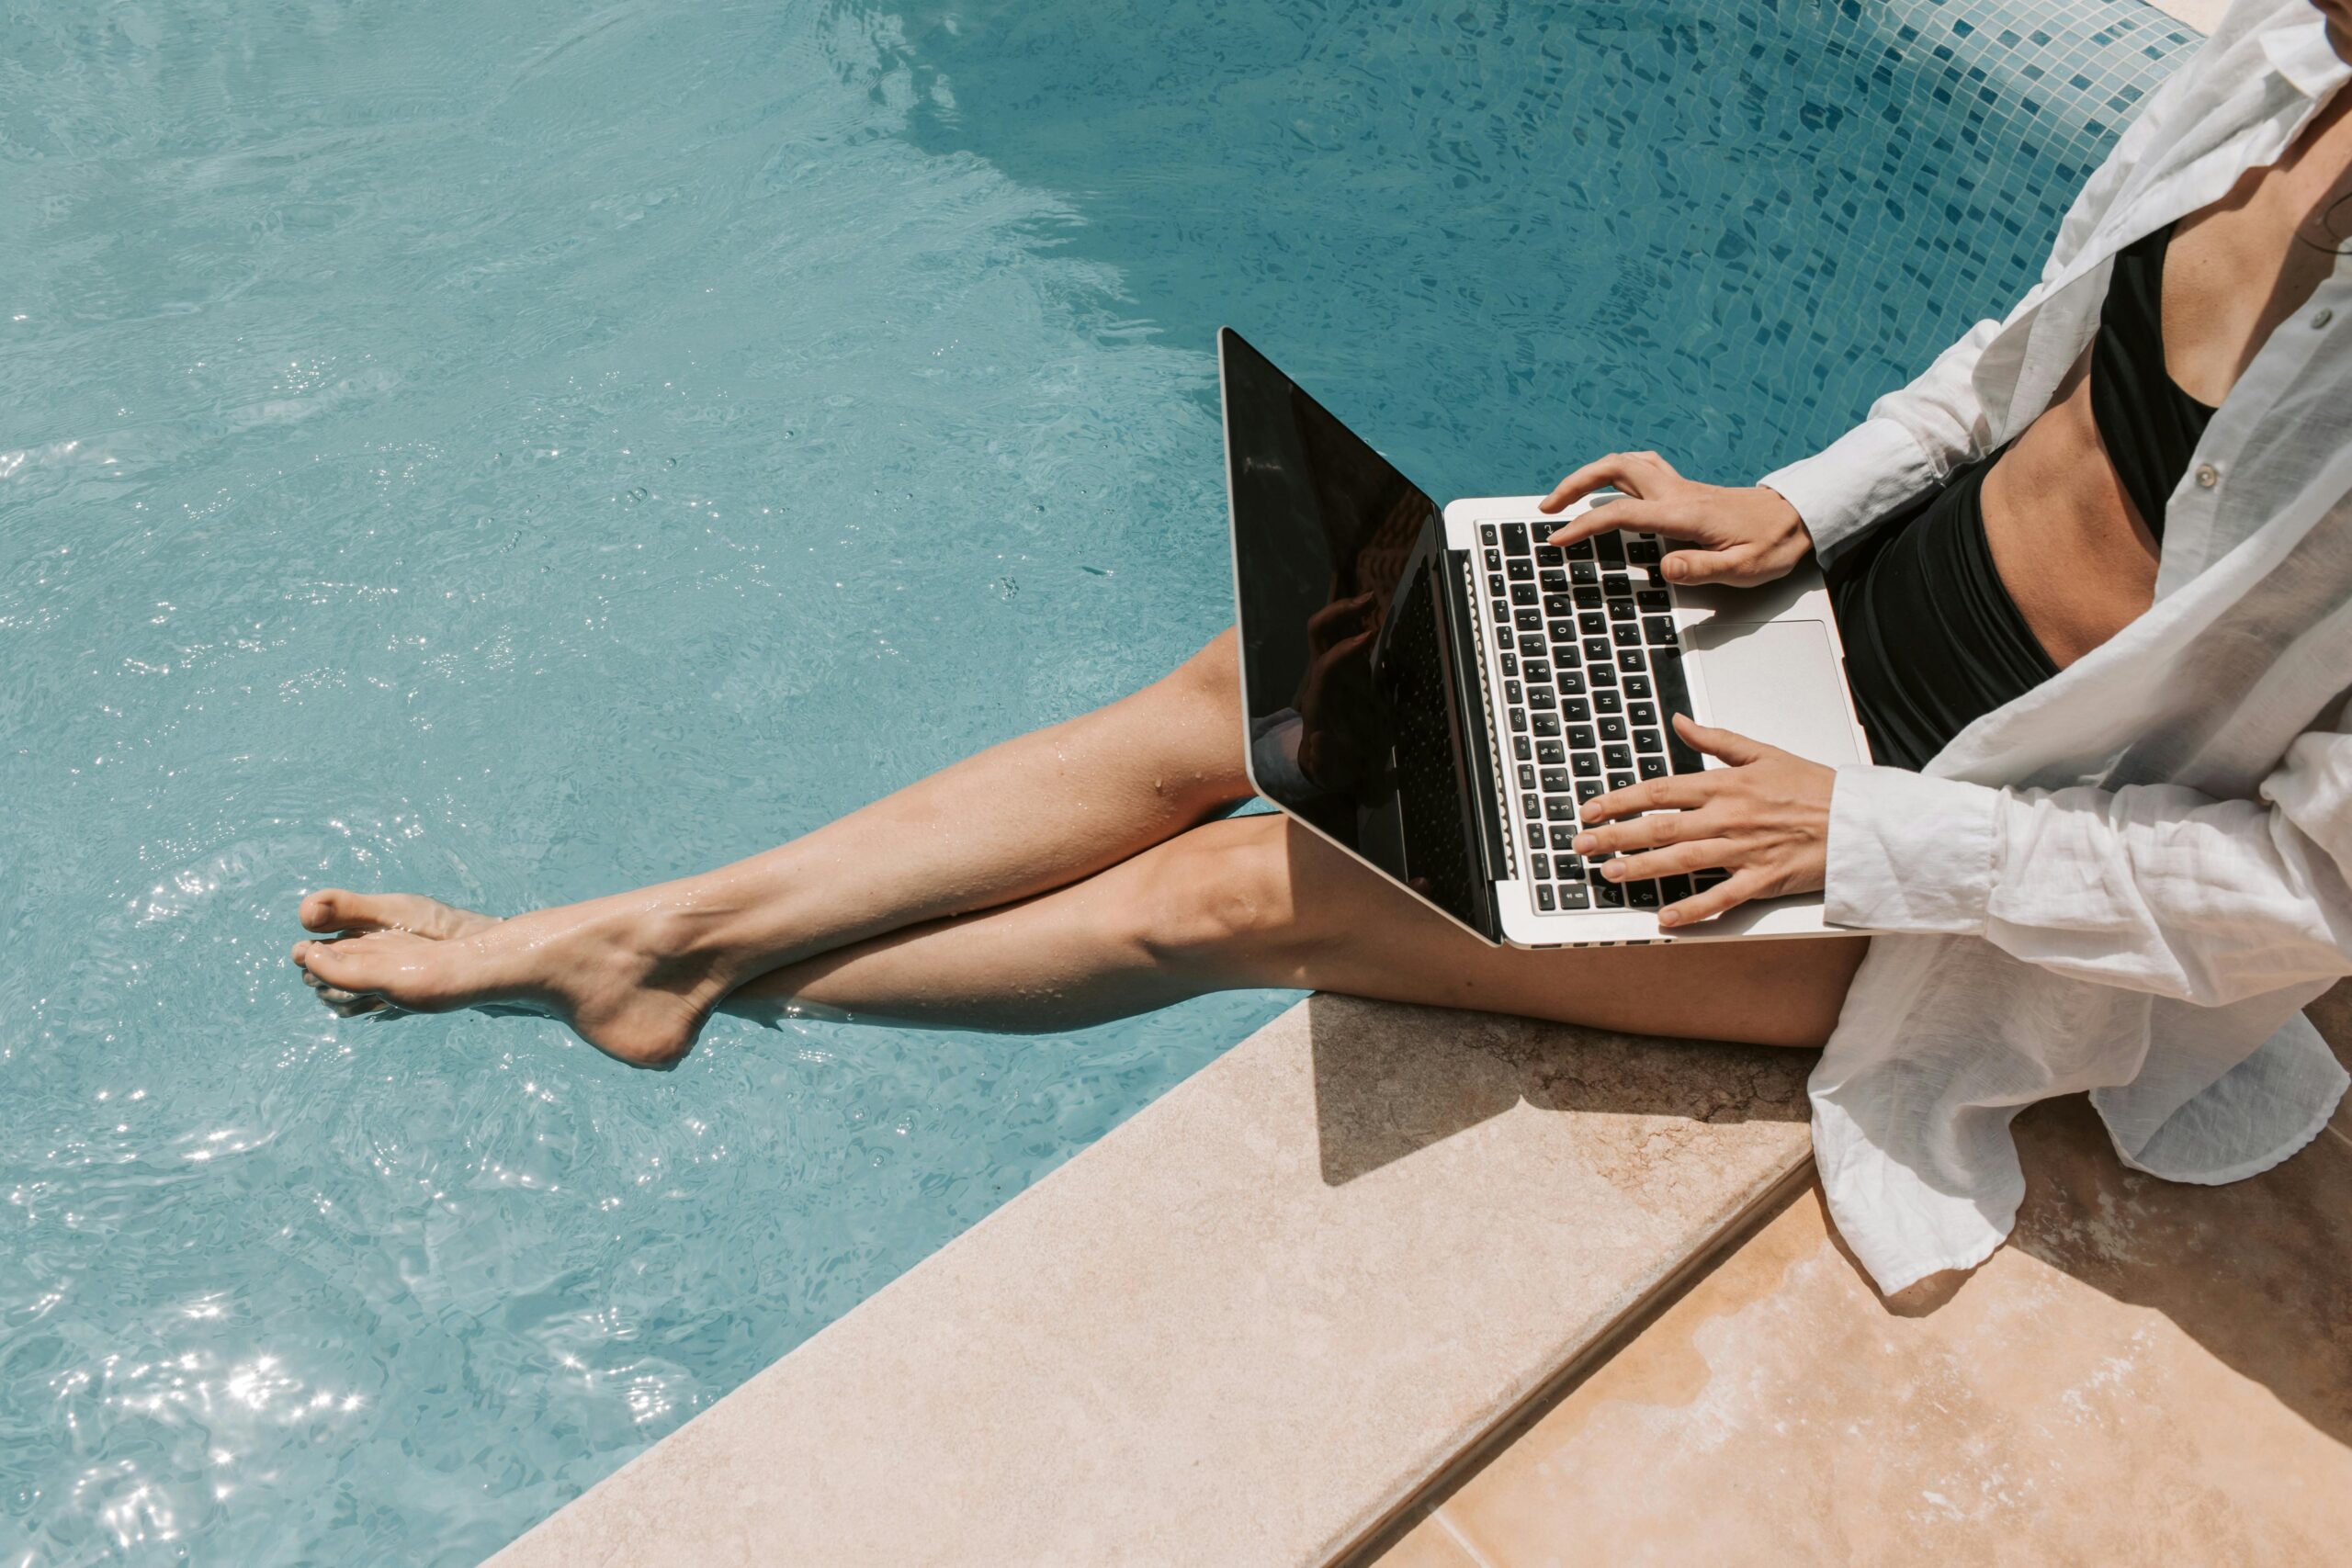 A person practicing smart living by using a laptop by a pool's edge, with legs dipped in water, dressed in a white shirt and dark shorts.